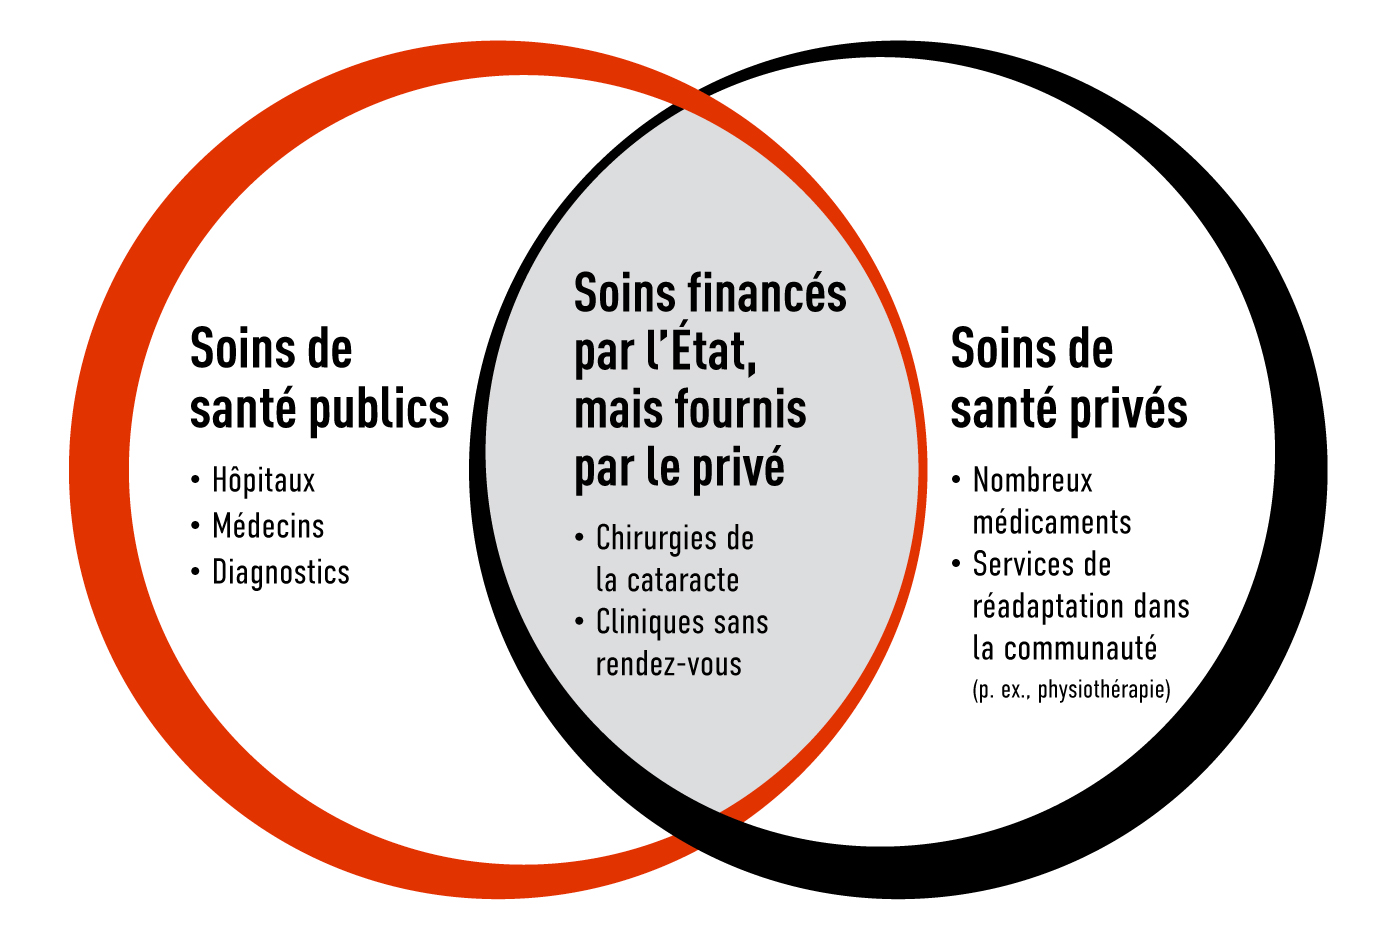 Venn diagram of publicly and privately funded health care in Canada, with hospitals, physicians and diagnostics sitting under public health care, drug therapies and long-term care sitting under private health care, and cataract surgeries and walk-in clinic sitting in the middle as publicly-funded, privately-delivered health care.